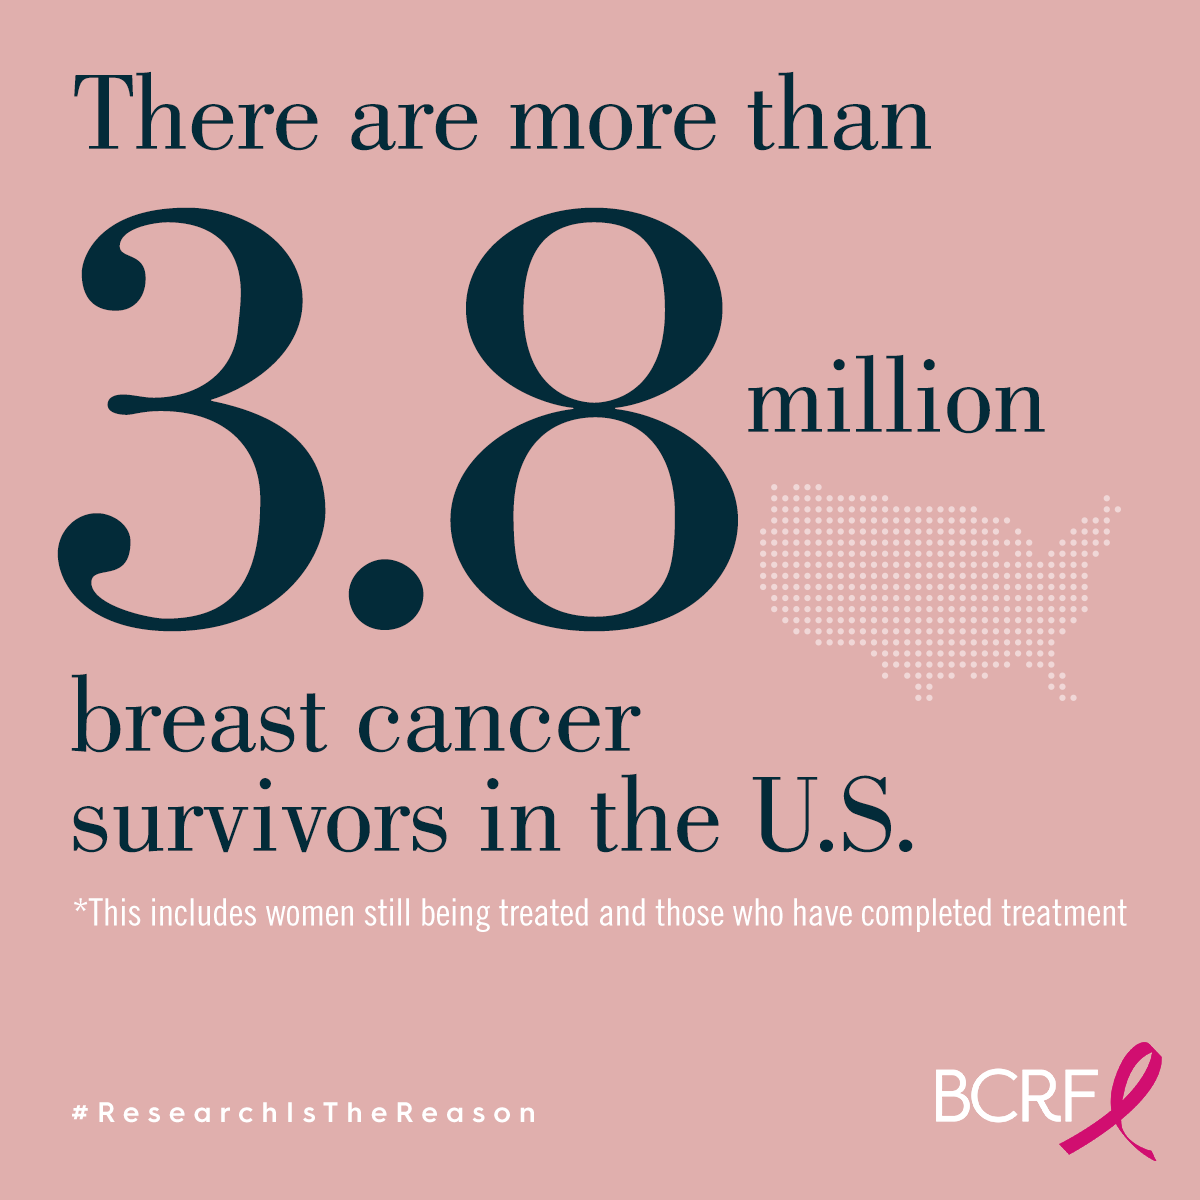 There are more than 3.8 million breast cancer survivors in the U.S.